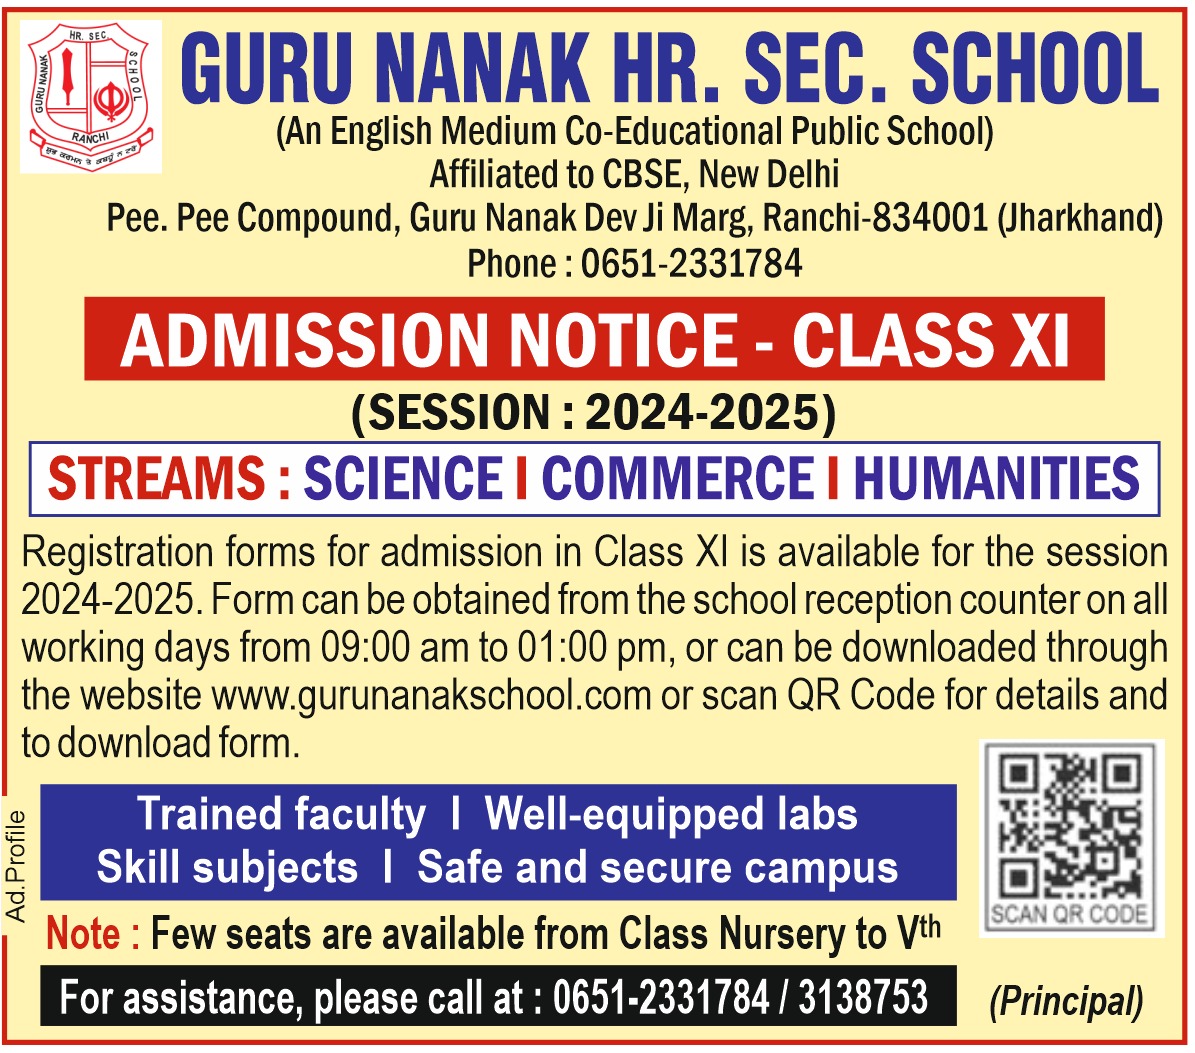 Admission Notice for session 2024-2025